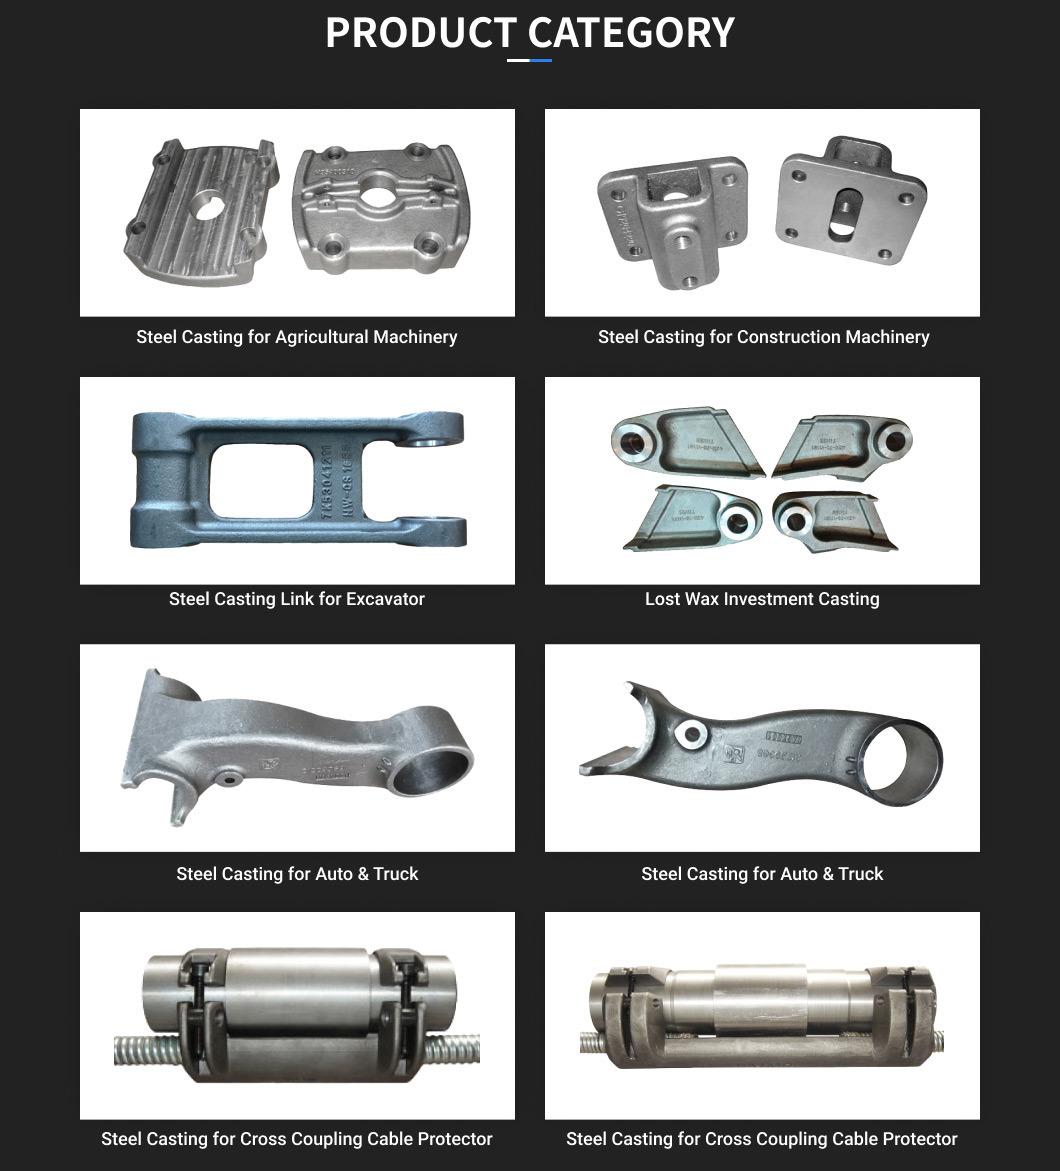 High Standard Reusable Prototype Casting Machining Parts for Agriculural Machinery Parts